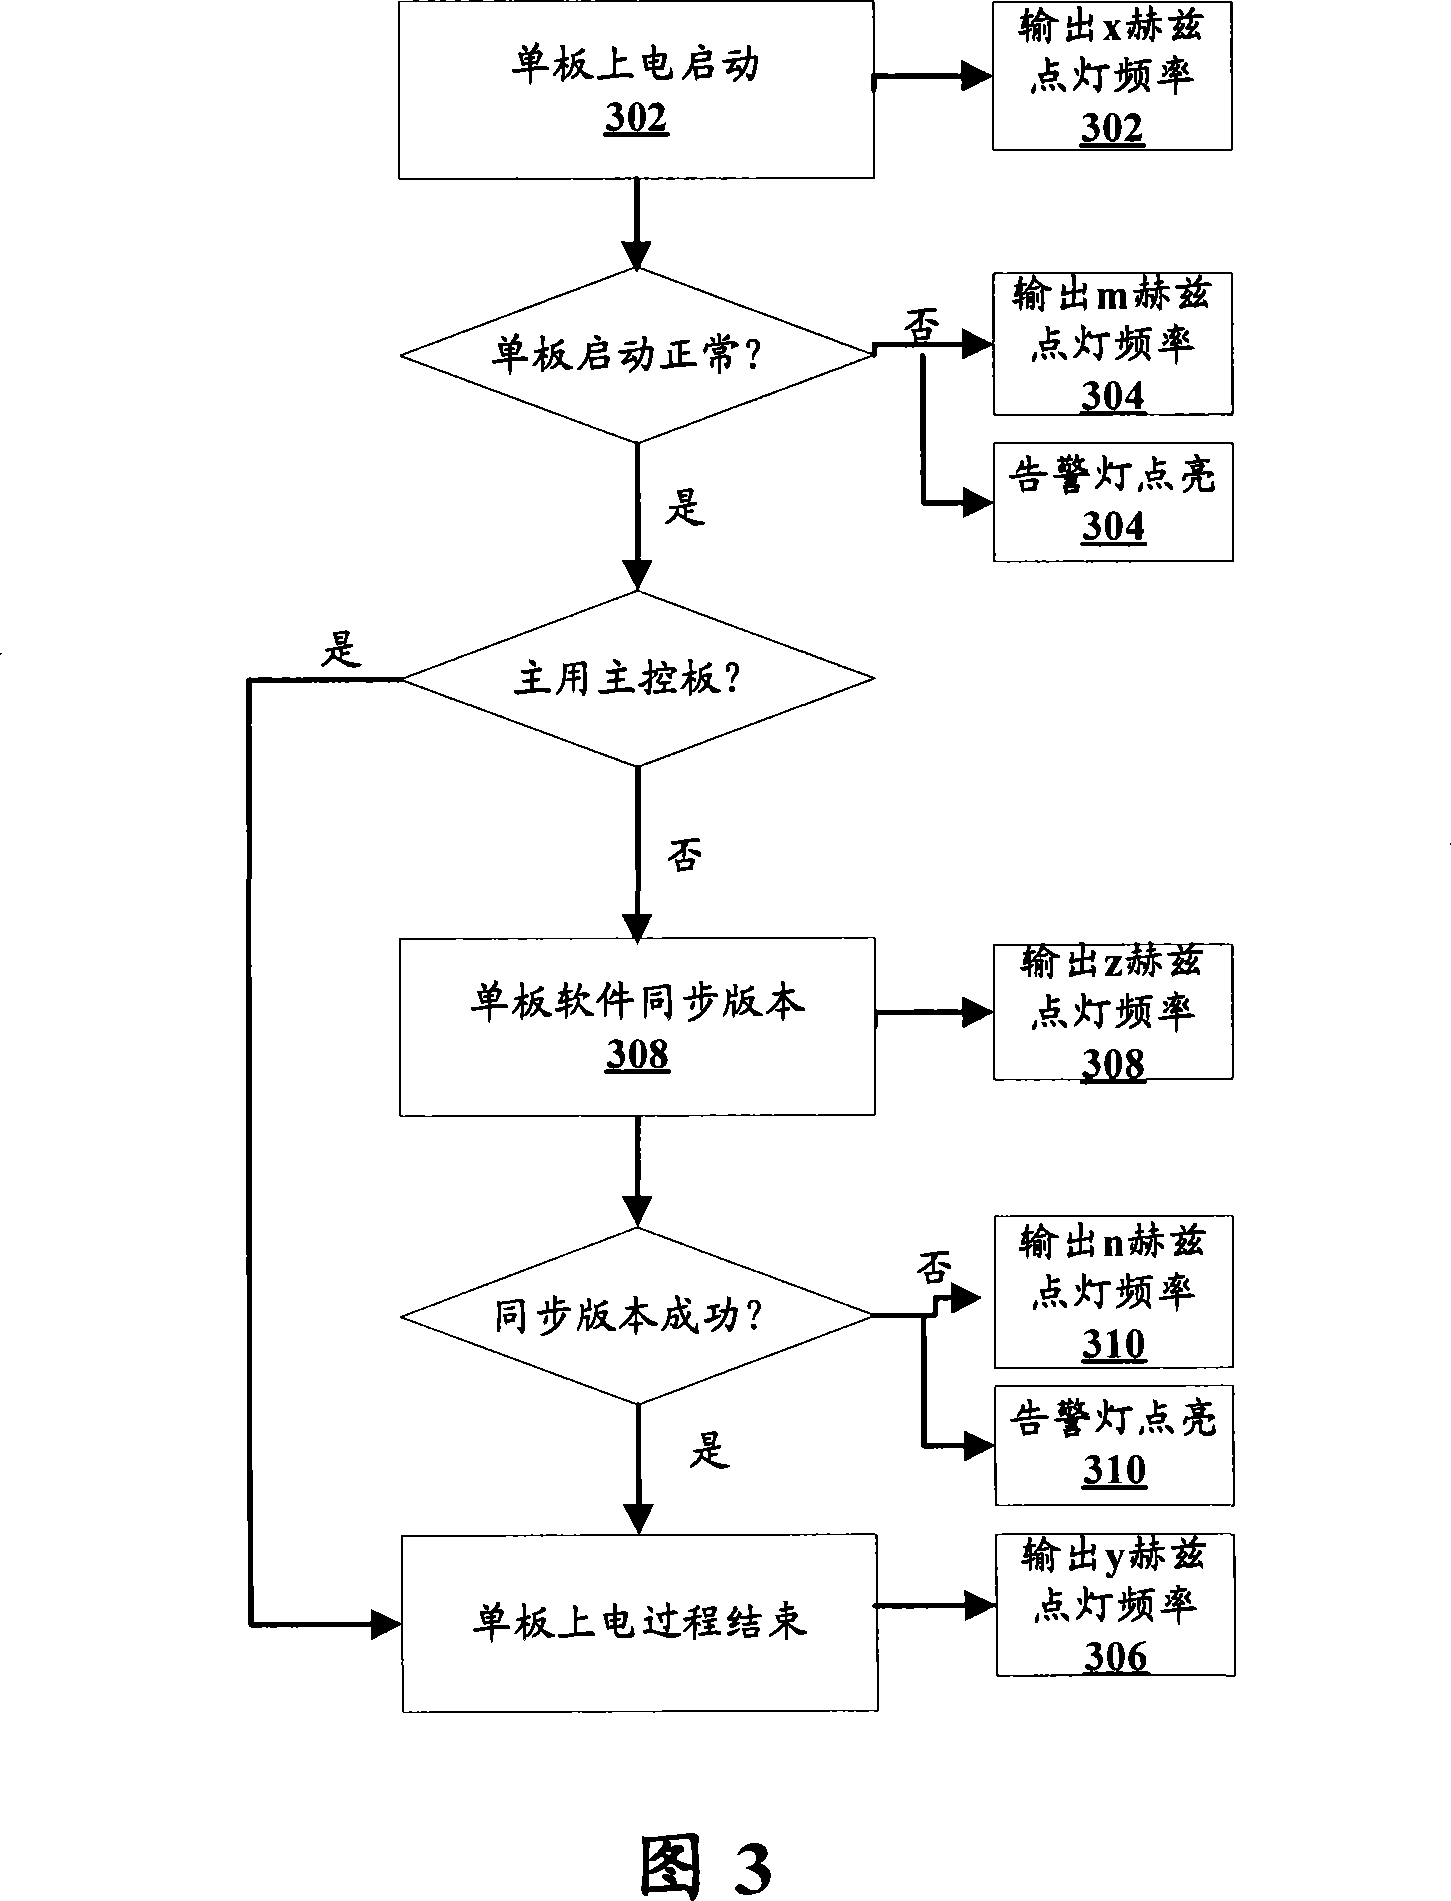 A communication device and operation status indication method